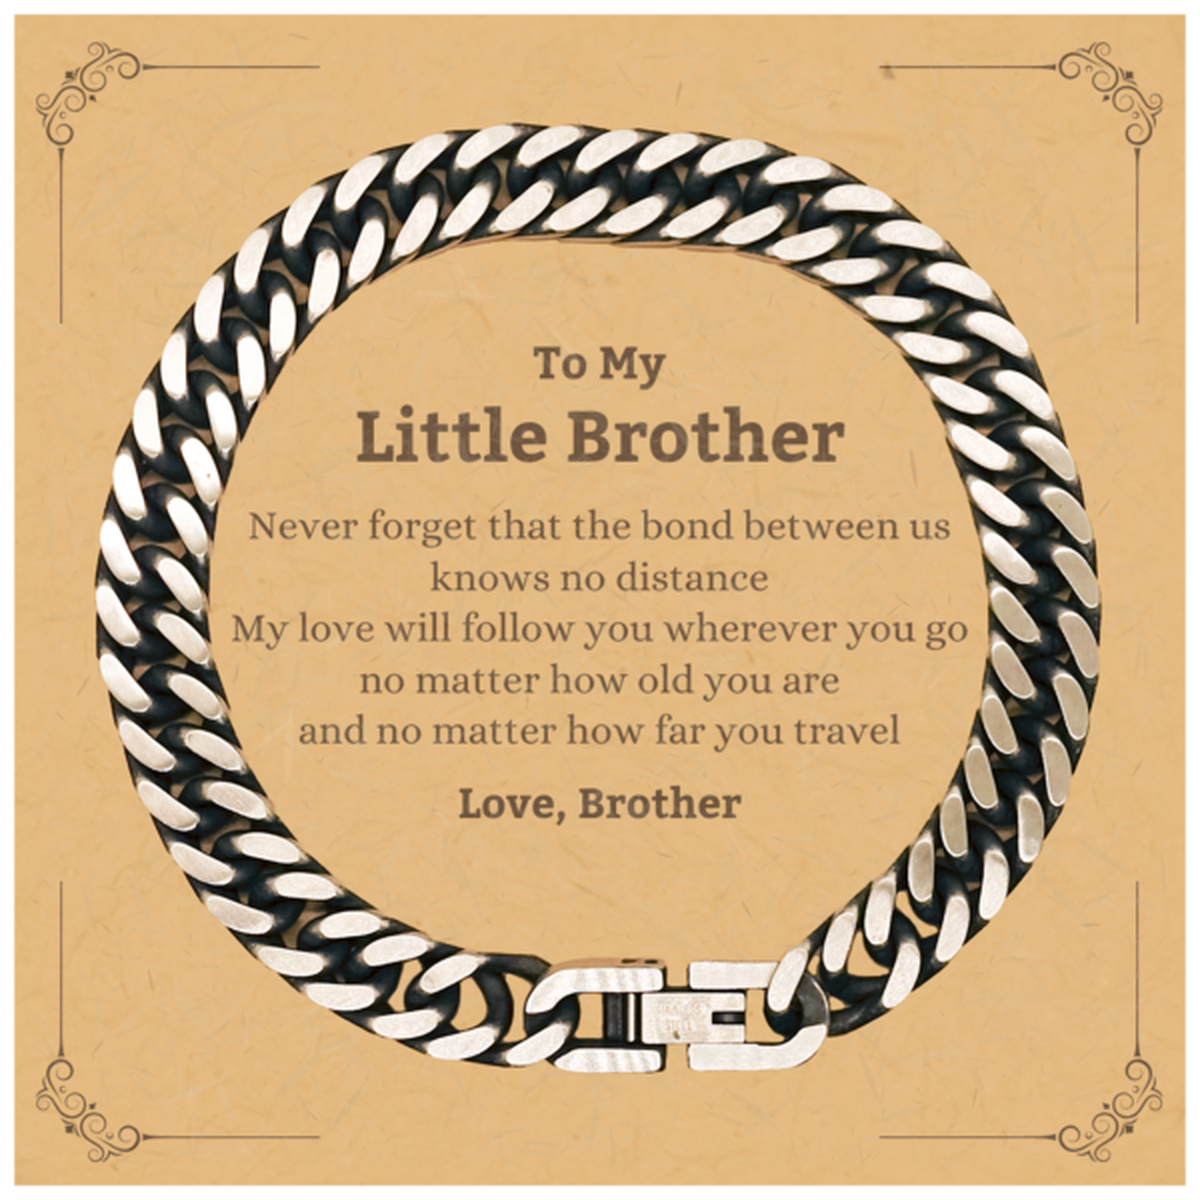 Little Brother Birthday Gifts from Brother, Adjustable Cuban Link Chain Bracelet for Little Brother Christmas Graduation Unique Gifts Little Brother Never forget that the bond between us knows no distance. Love, Brother